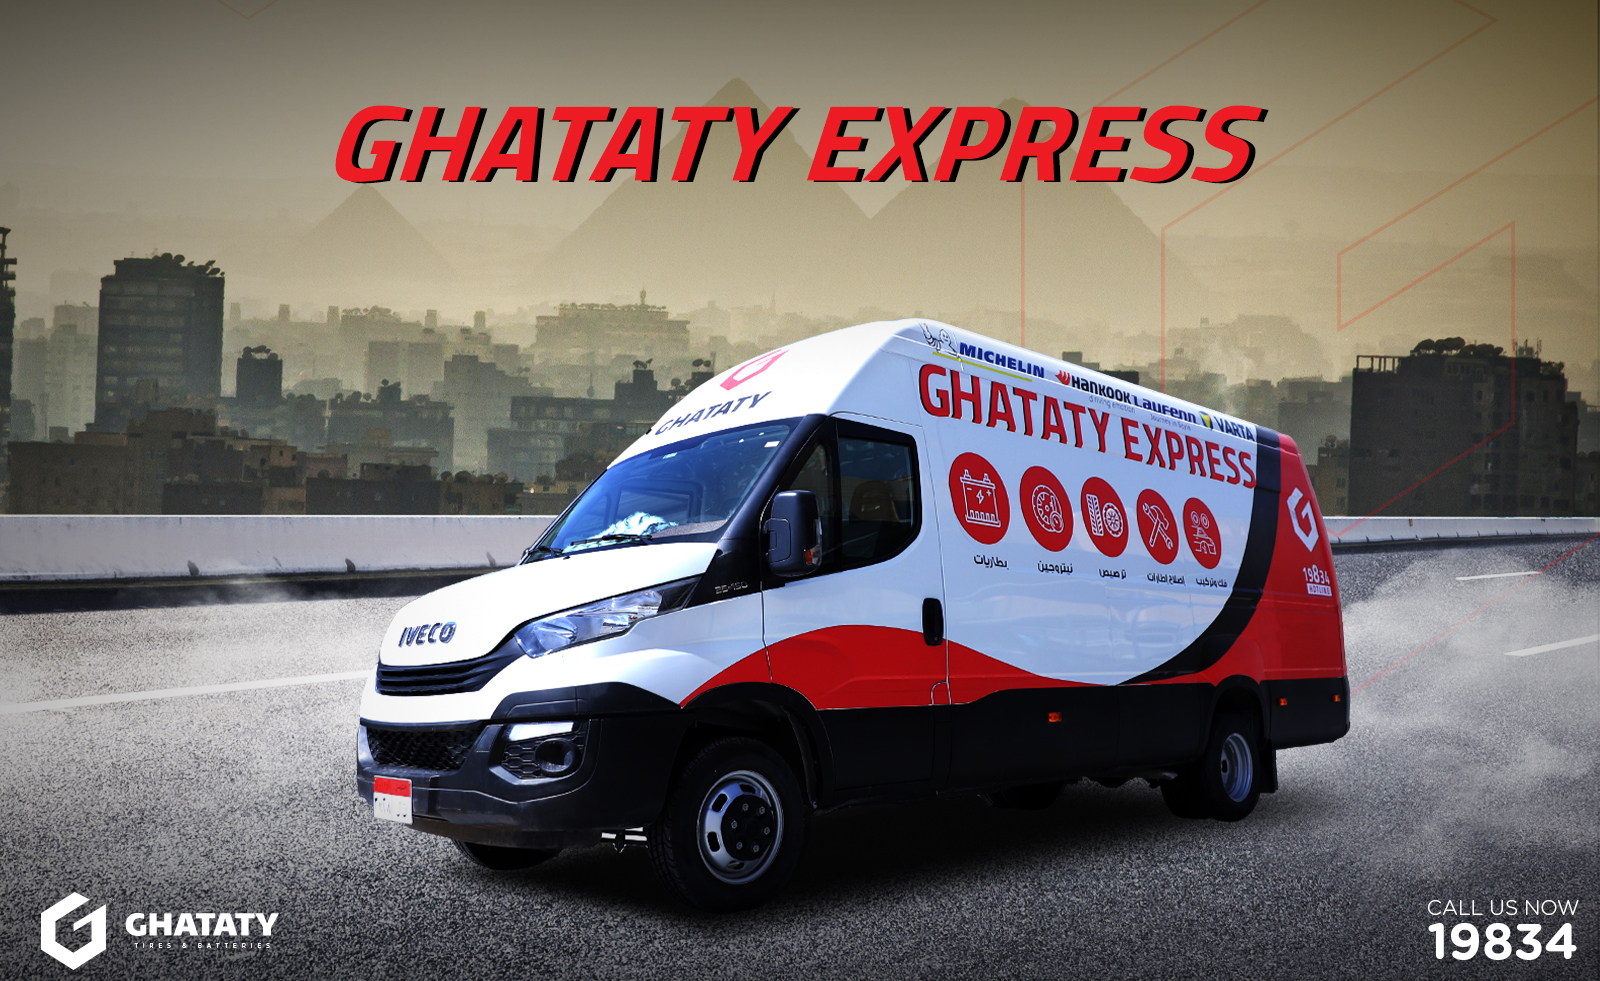 Ghataty Express service in Cairo and Giza